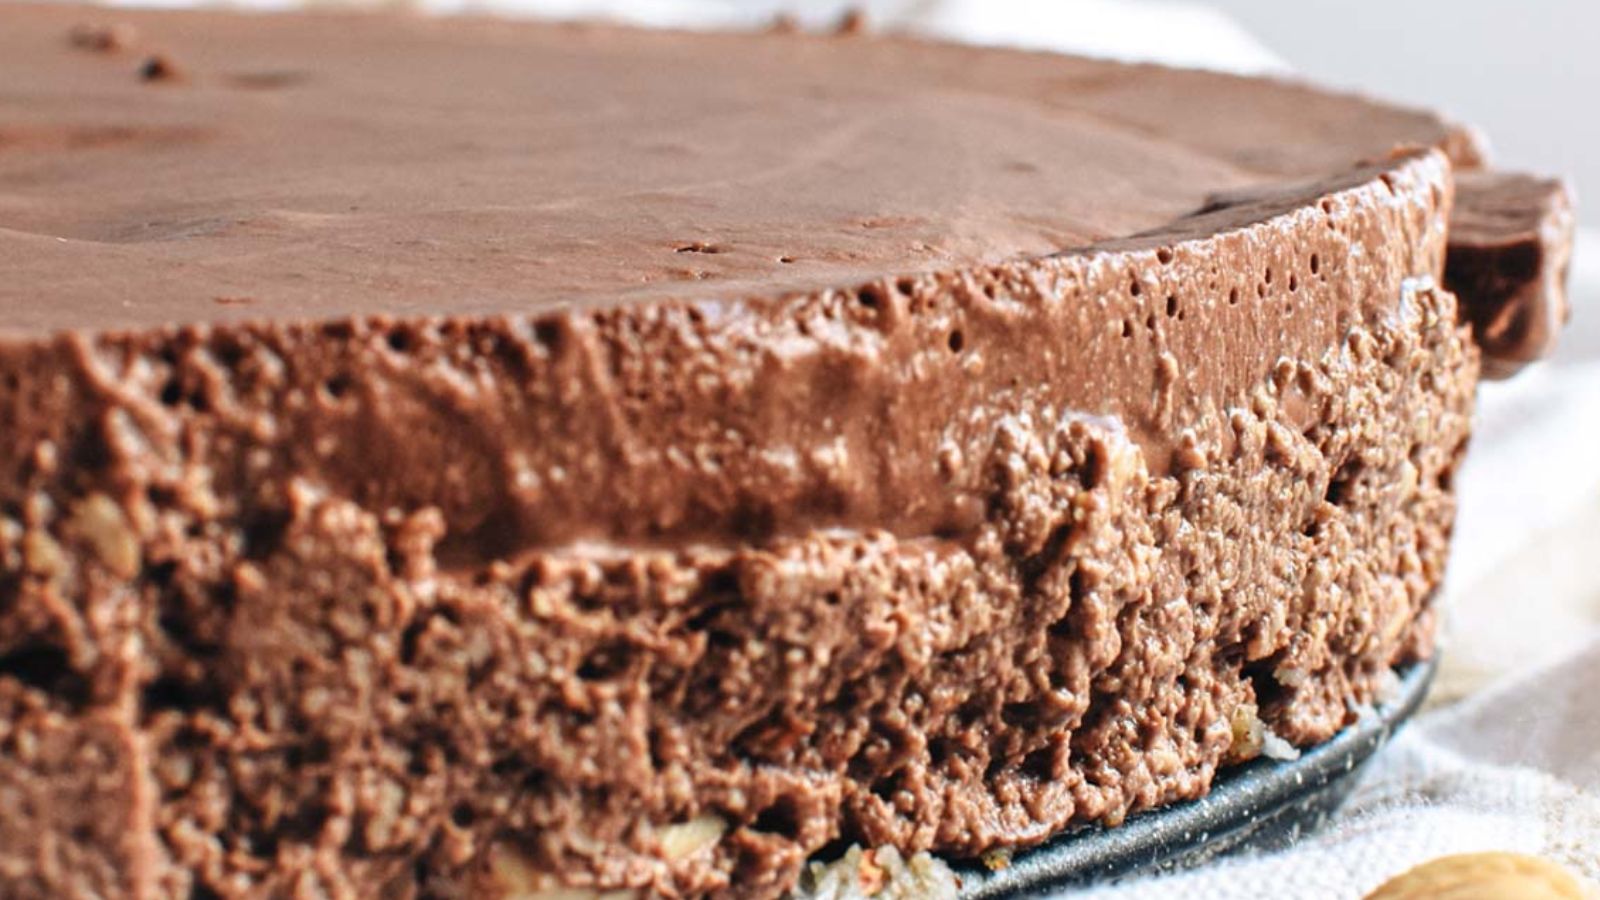 Prepare To Be Amazed: 13 Vegan Desserts That Defy Expectations